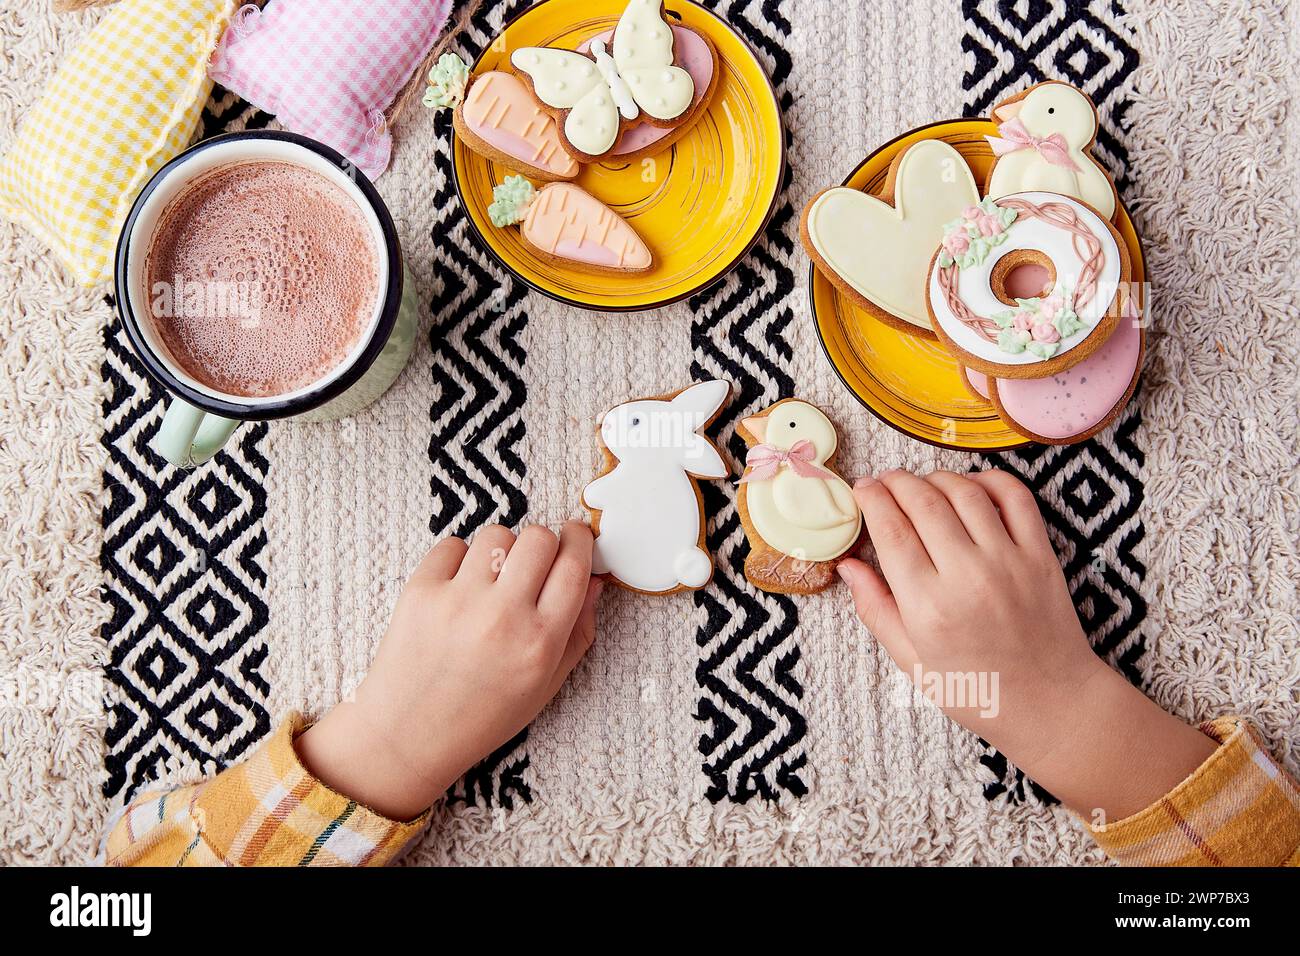 Holding Easter cookies, childs hands create a background of happy Easter traditions Stock Photo